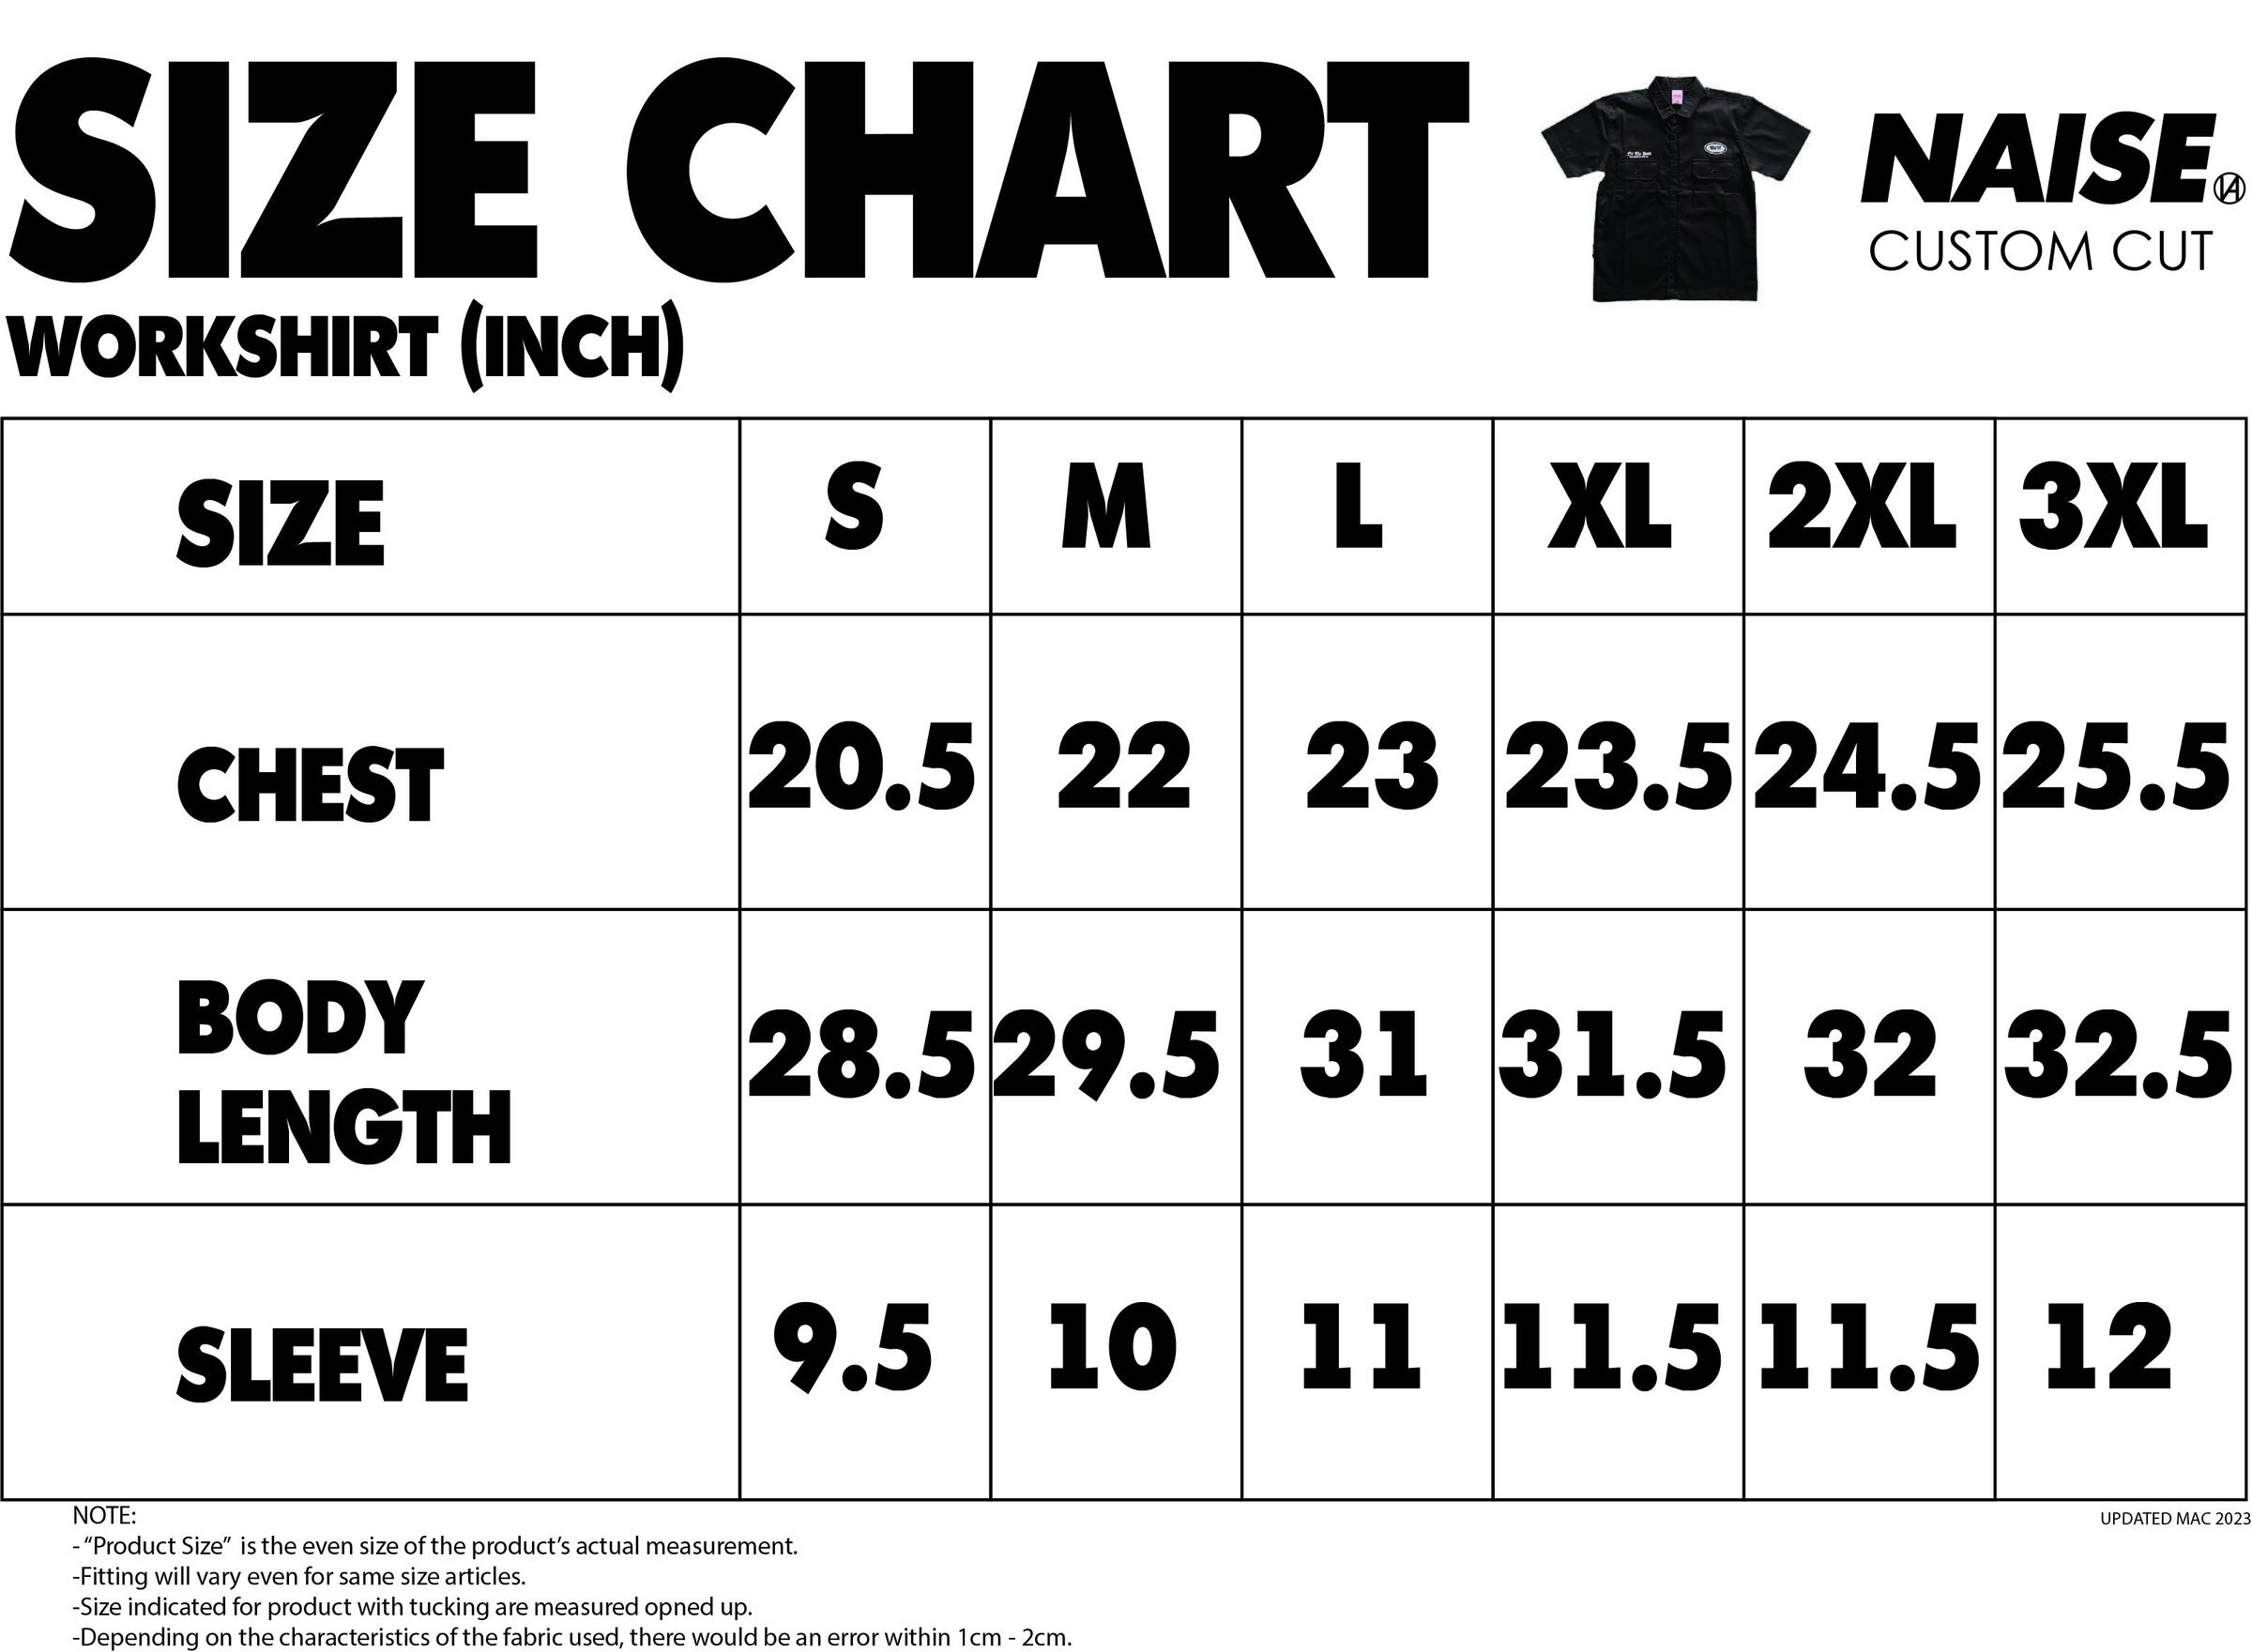 SIZE CHART WORKSHIRT 2023 MUQRIE NOTE INCLUDED